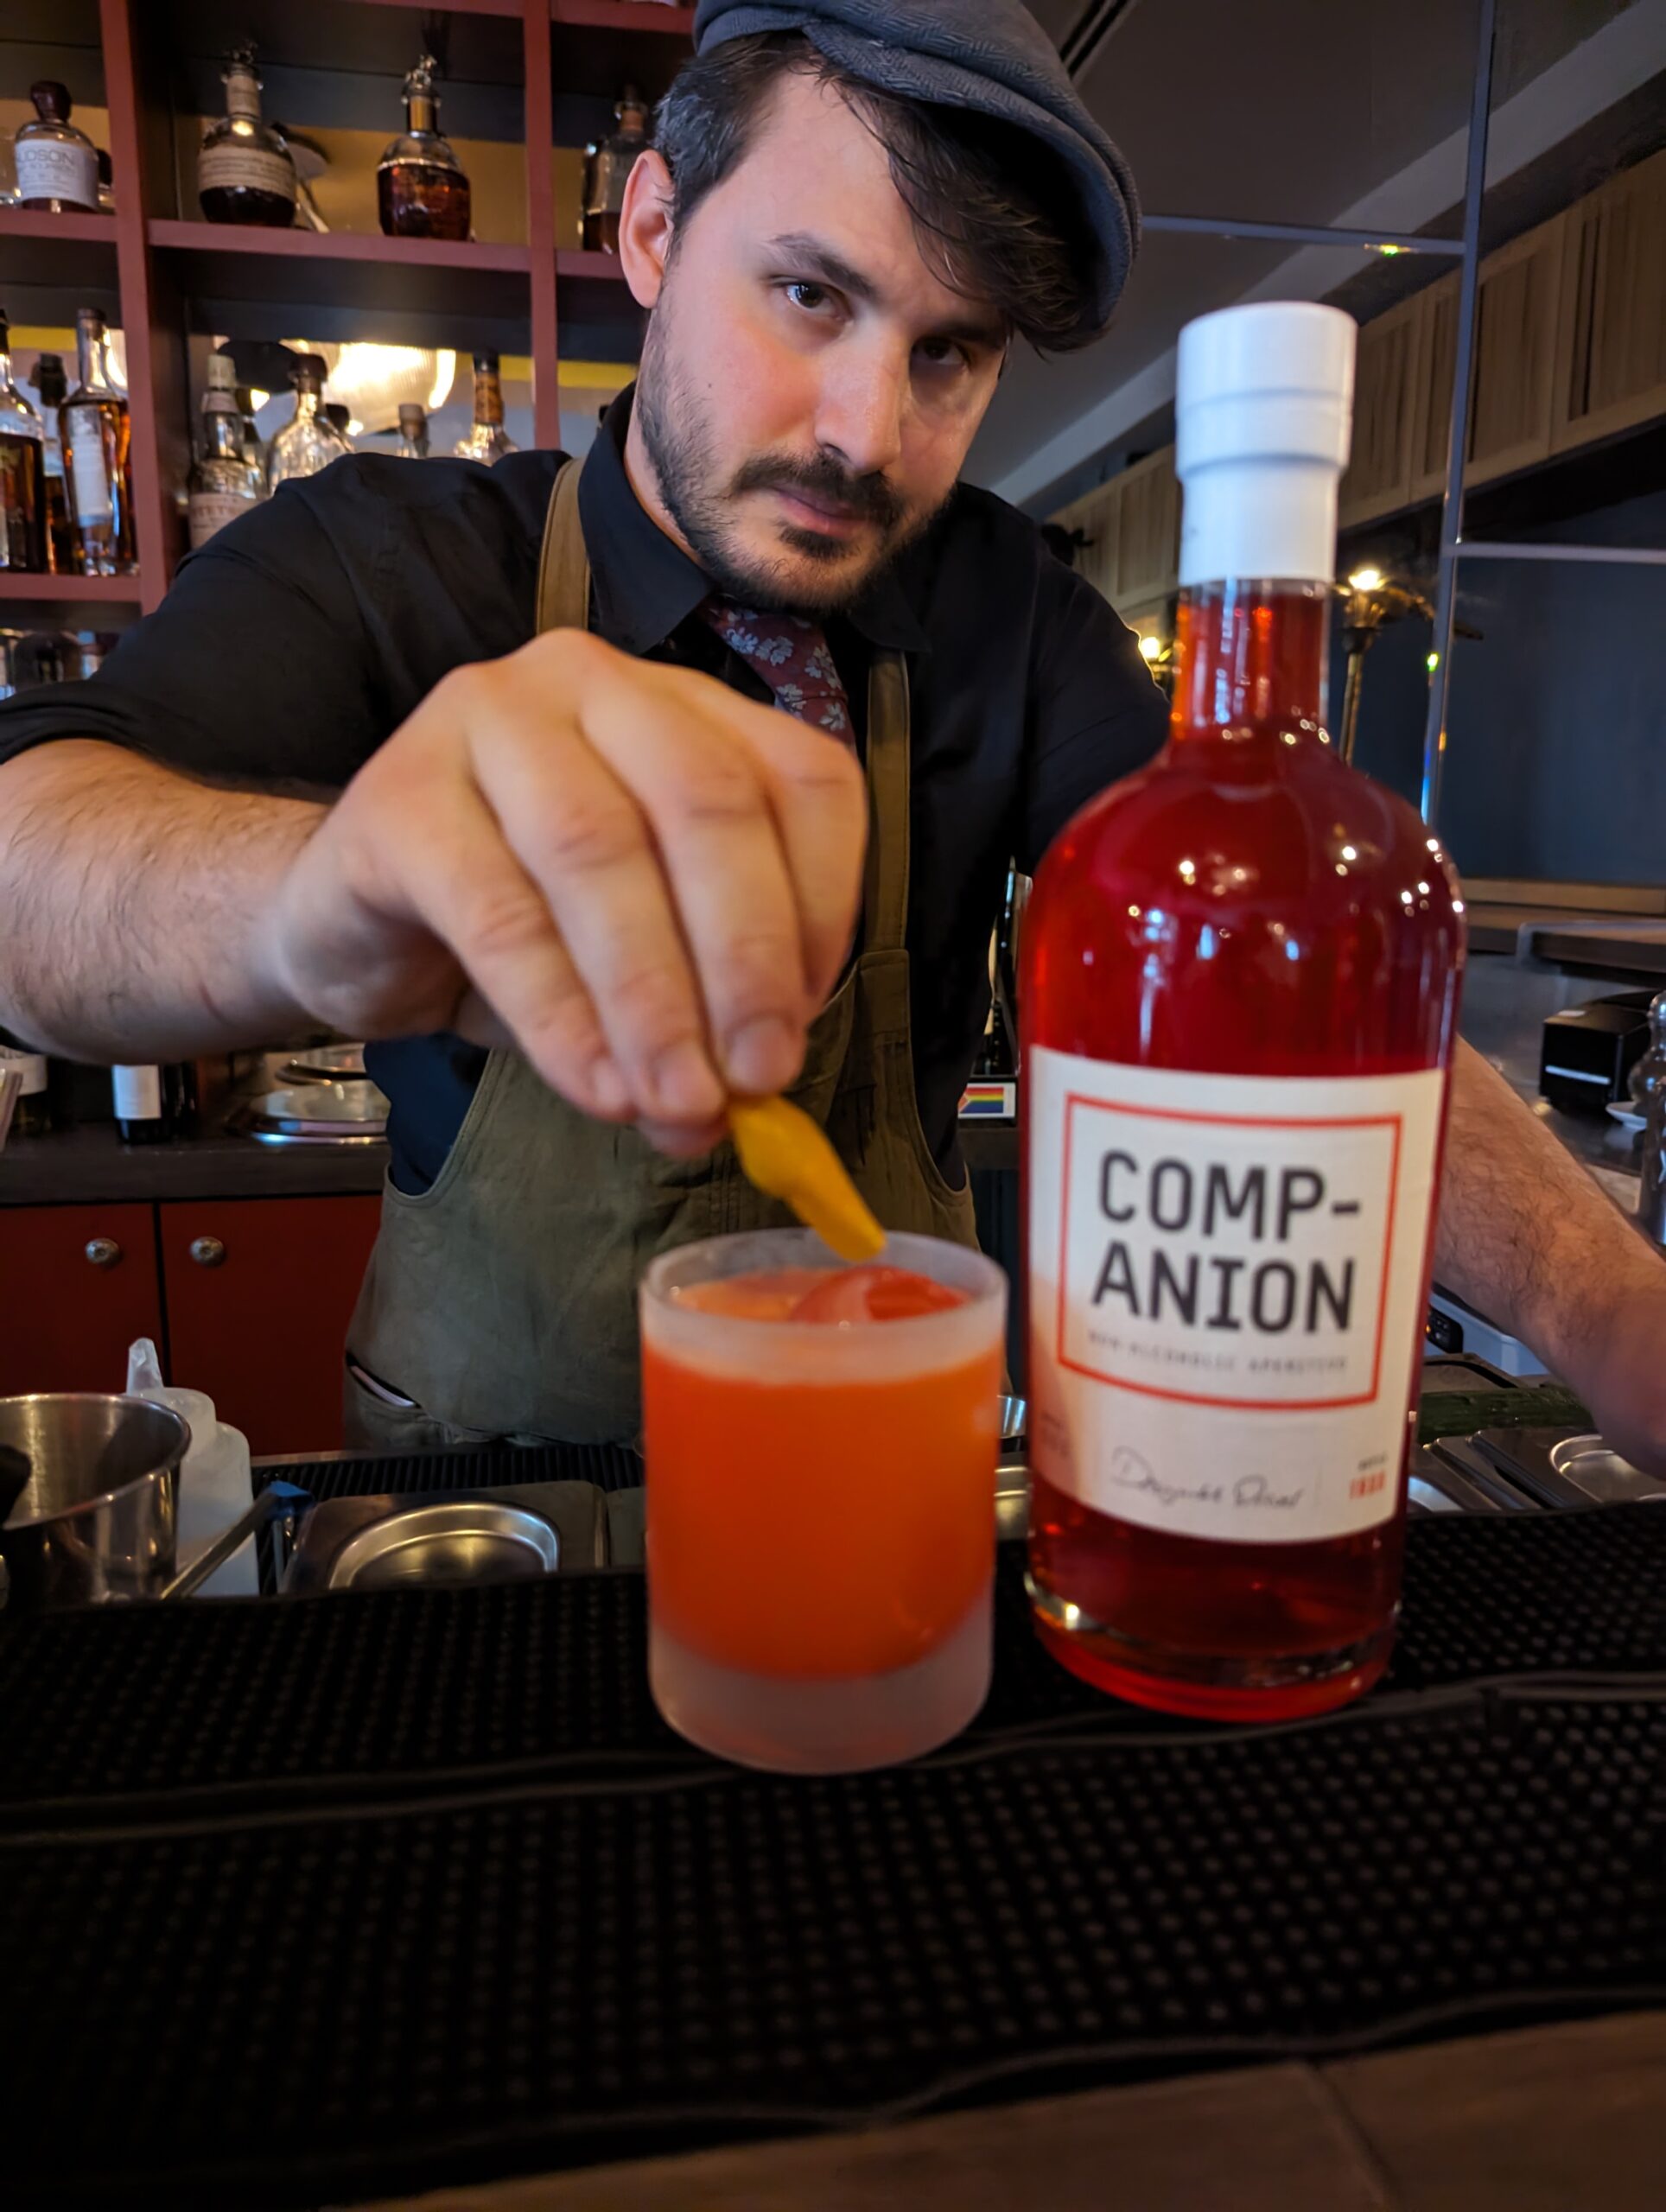 A barkeep adding an orange slice to a drink mixed with the Companion aperitivo